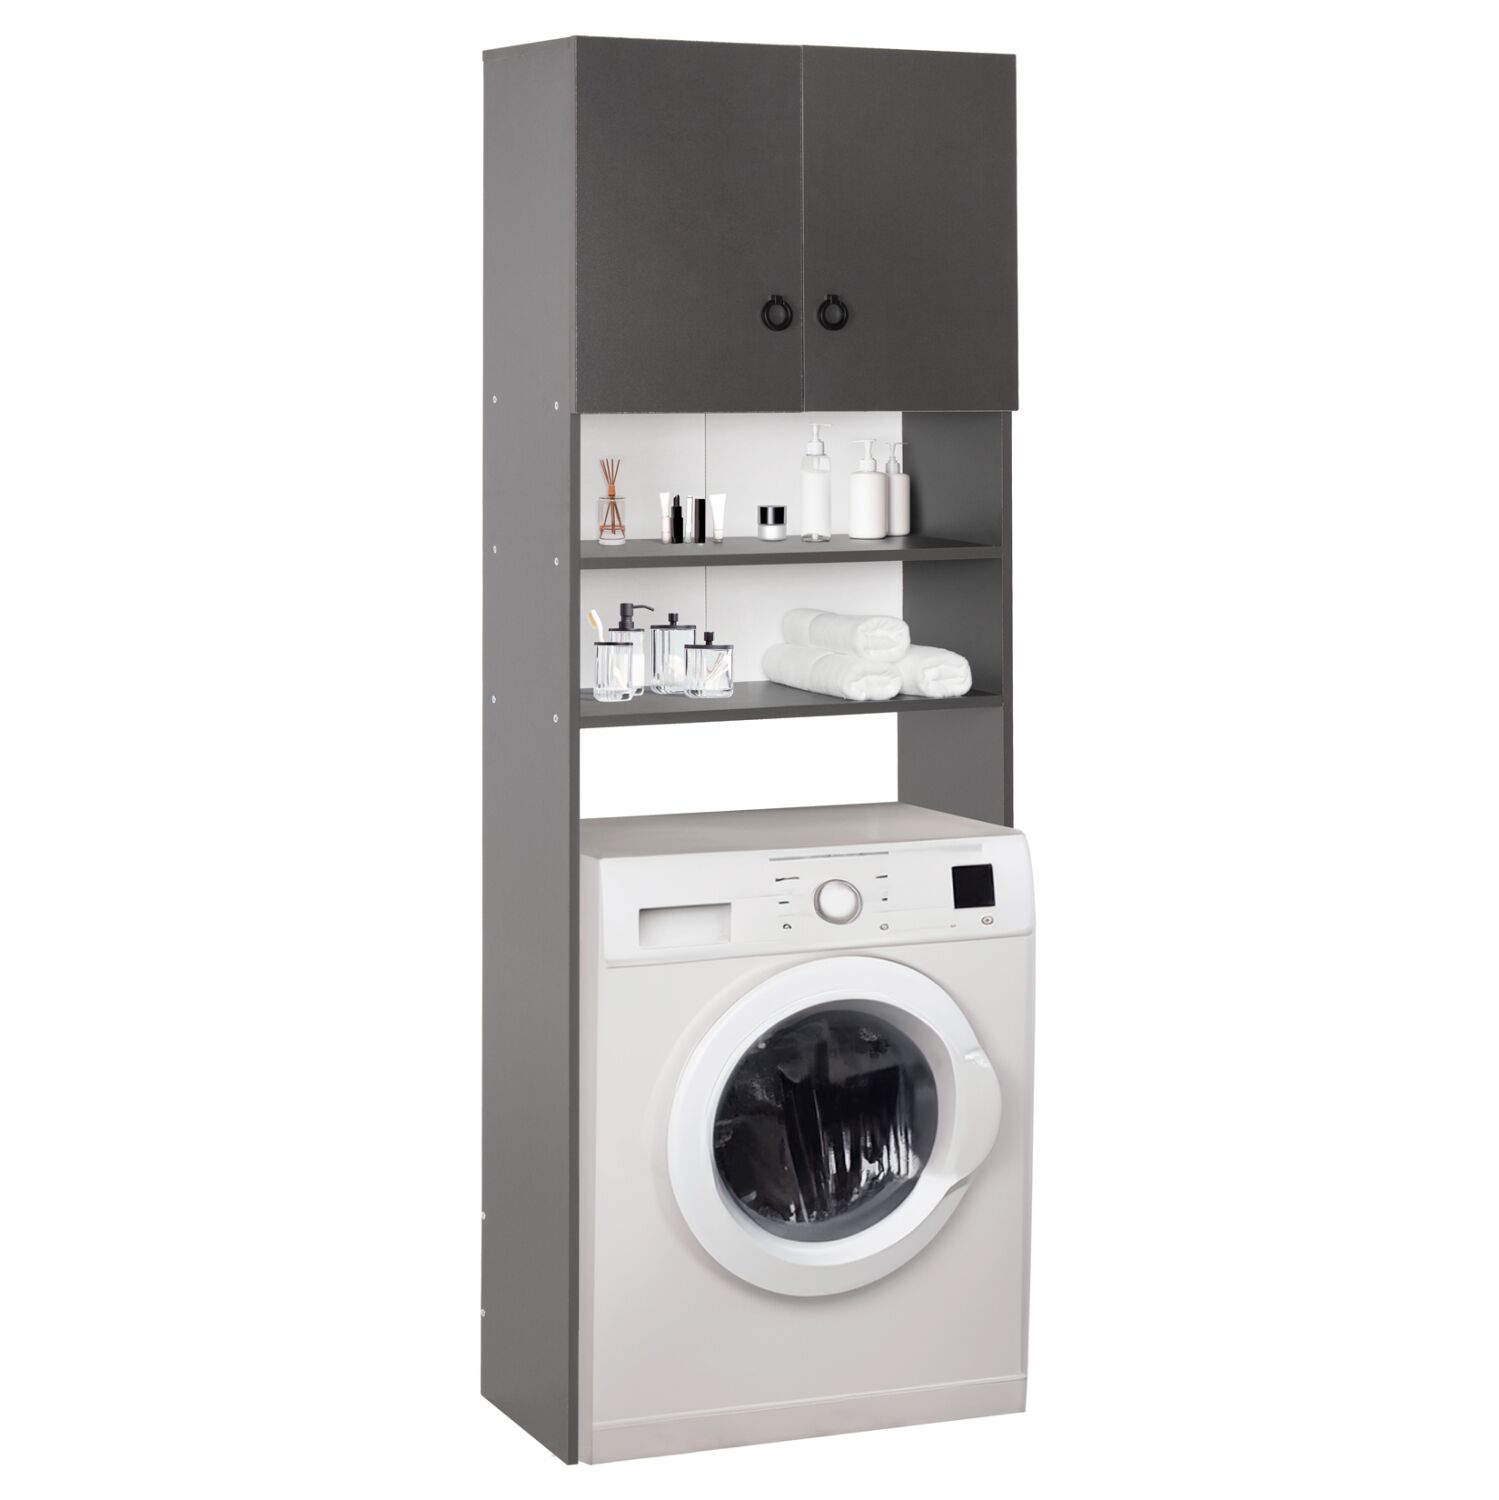 WASHING MACHINE FURNITURE TERRY HM9122.13 WITH CABINET AND SHELVES MELAMINE GREY 64Χ29Χ181Hcm.